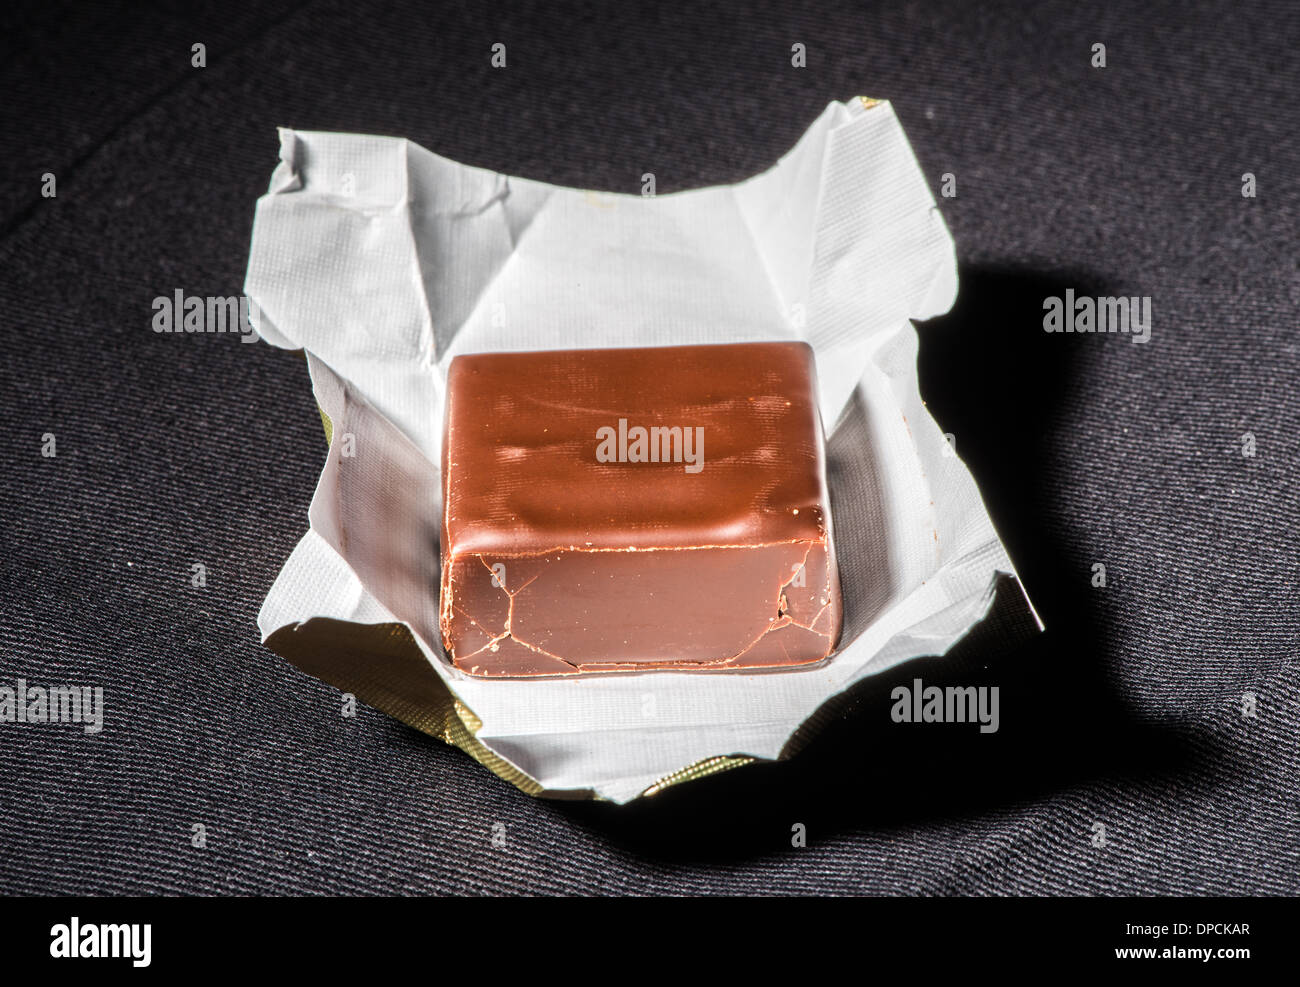 Chocolate and its packaging Stock Photo